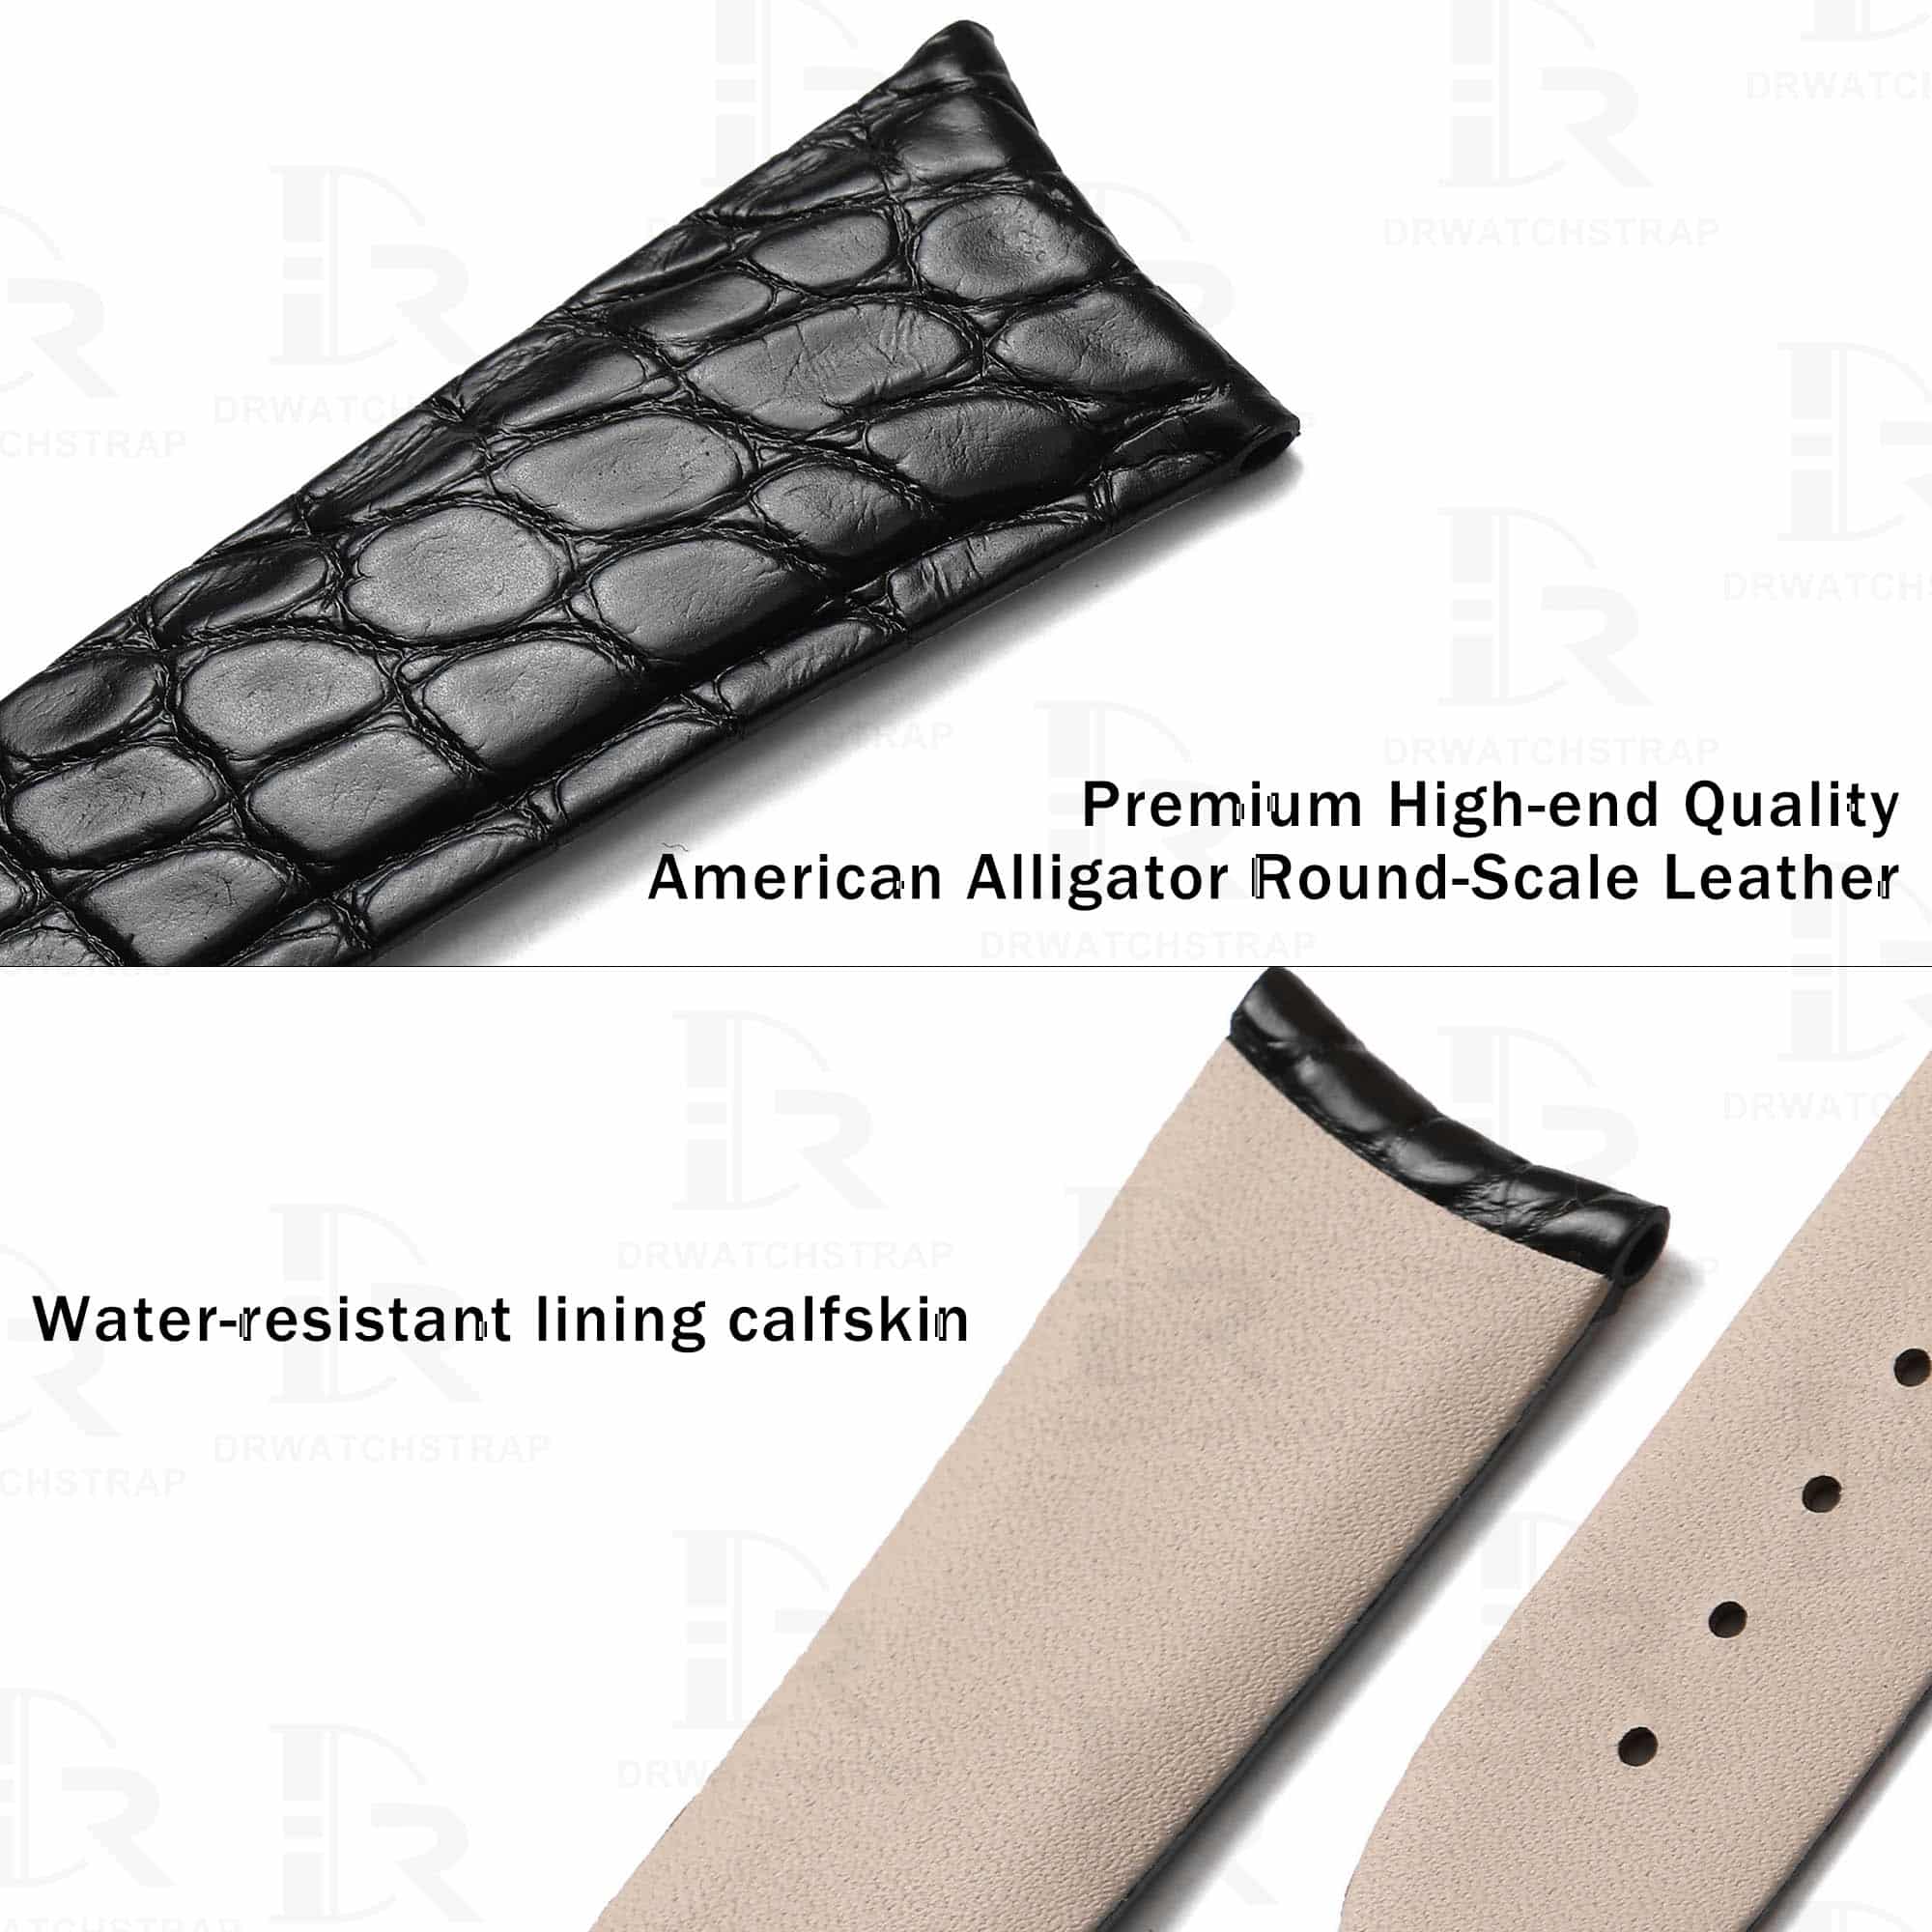 Genuine round-scale leather material